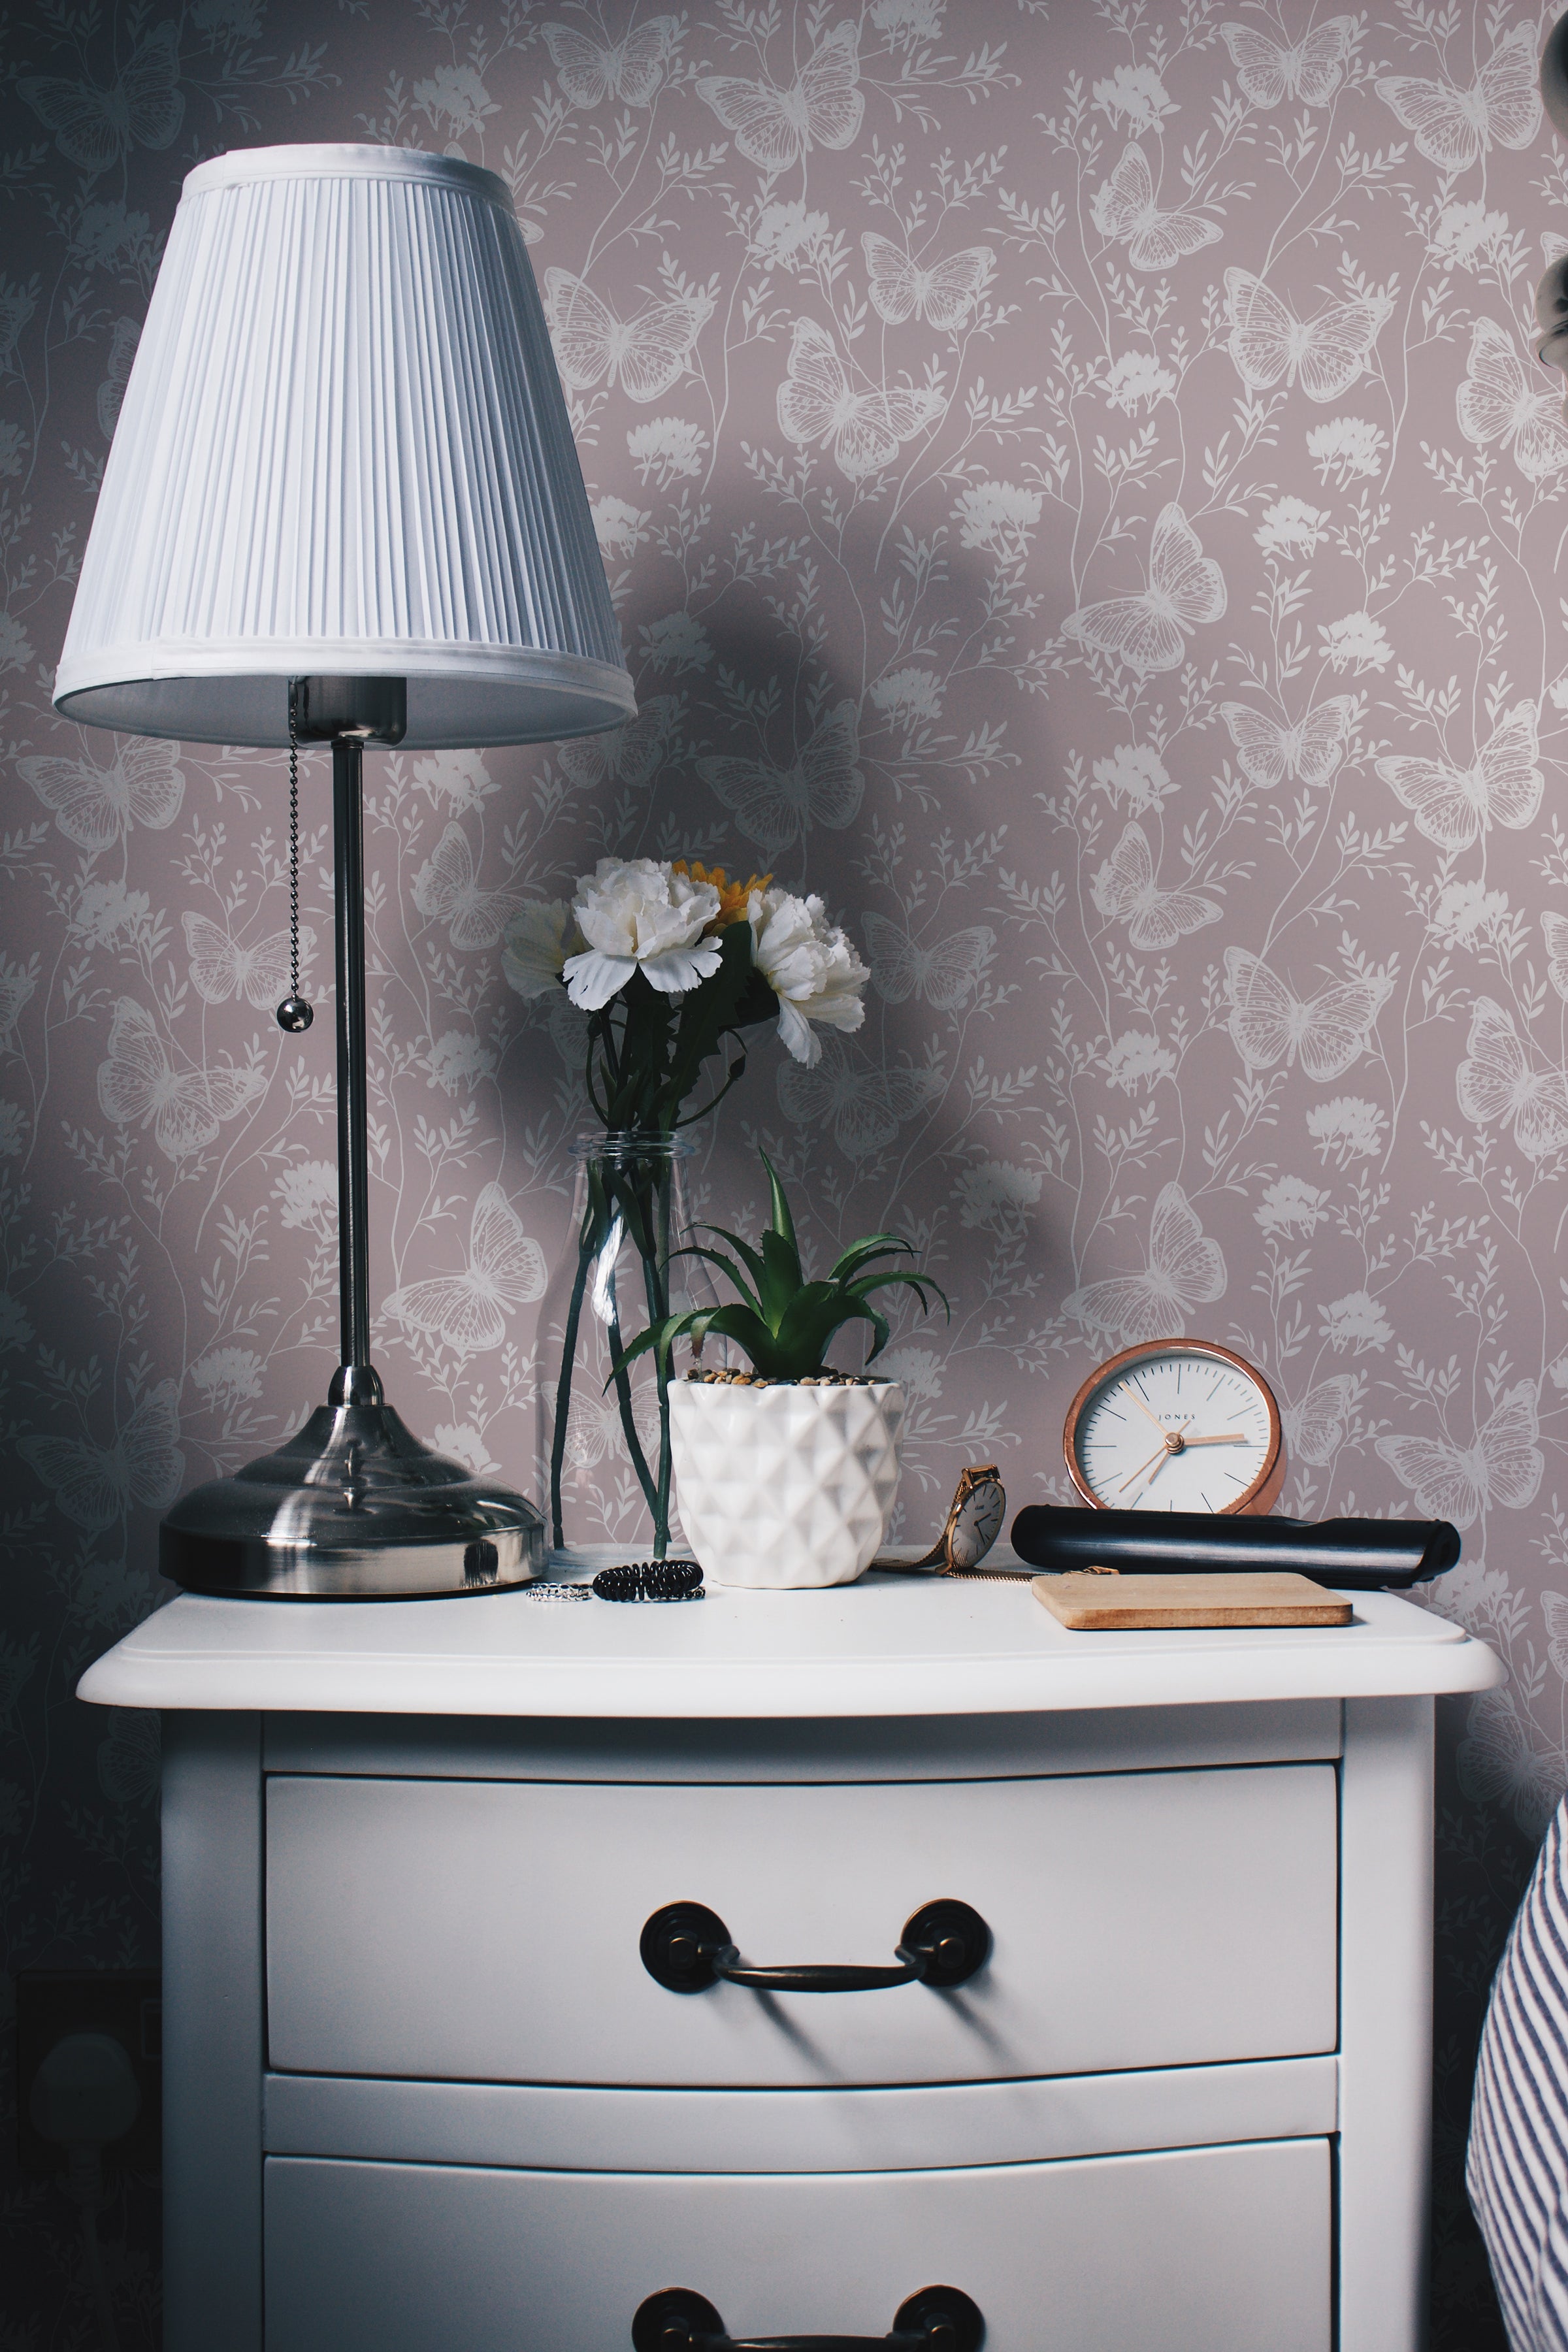 an image of a bedroom corner with the "Whimsical Wings Wallpaper" adorning the wall. The wallpaper features a soft mauve-pink background with an elegant pattern of white butterflies and floral elements, creating a tranquil and romantic atmosphere. A classic silver lamp and white flowers on a nightstand contribute to the room's serene ambiance.